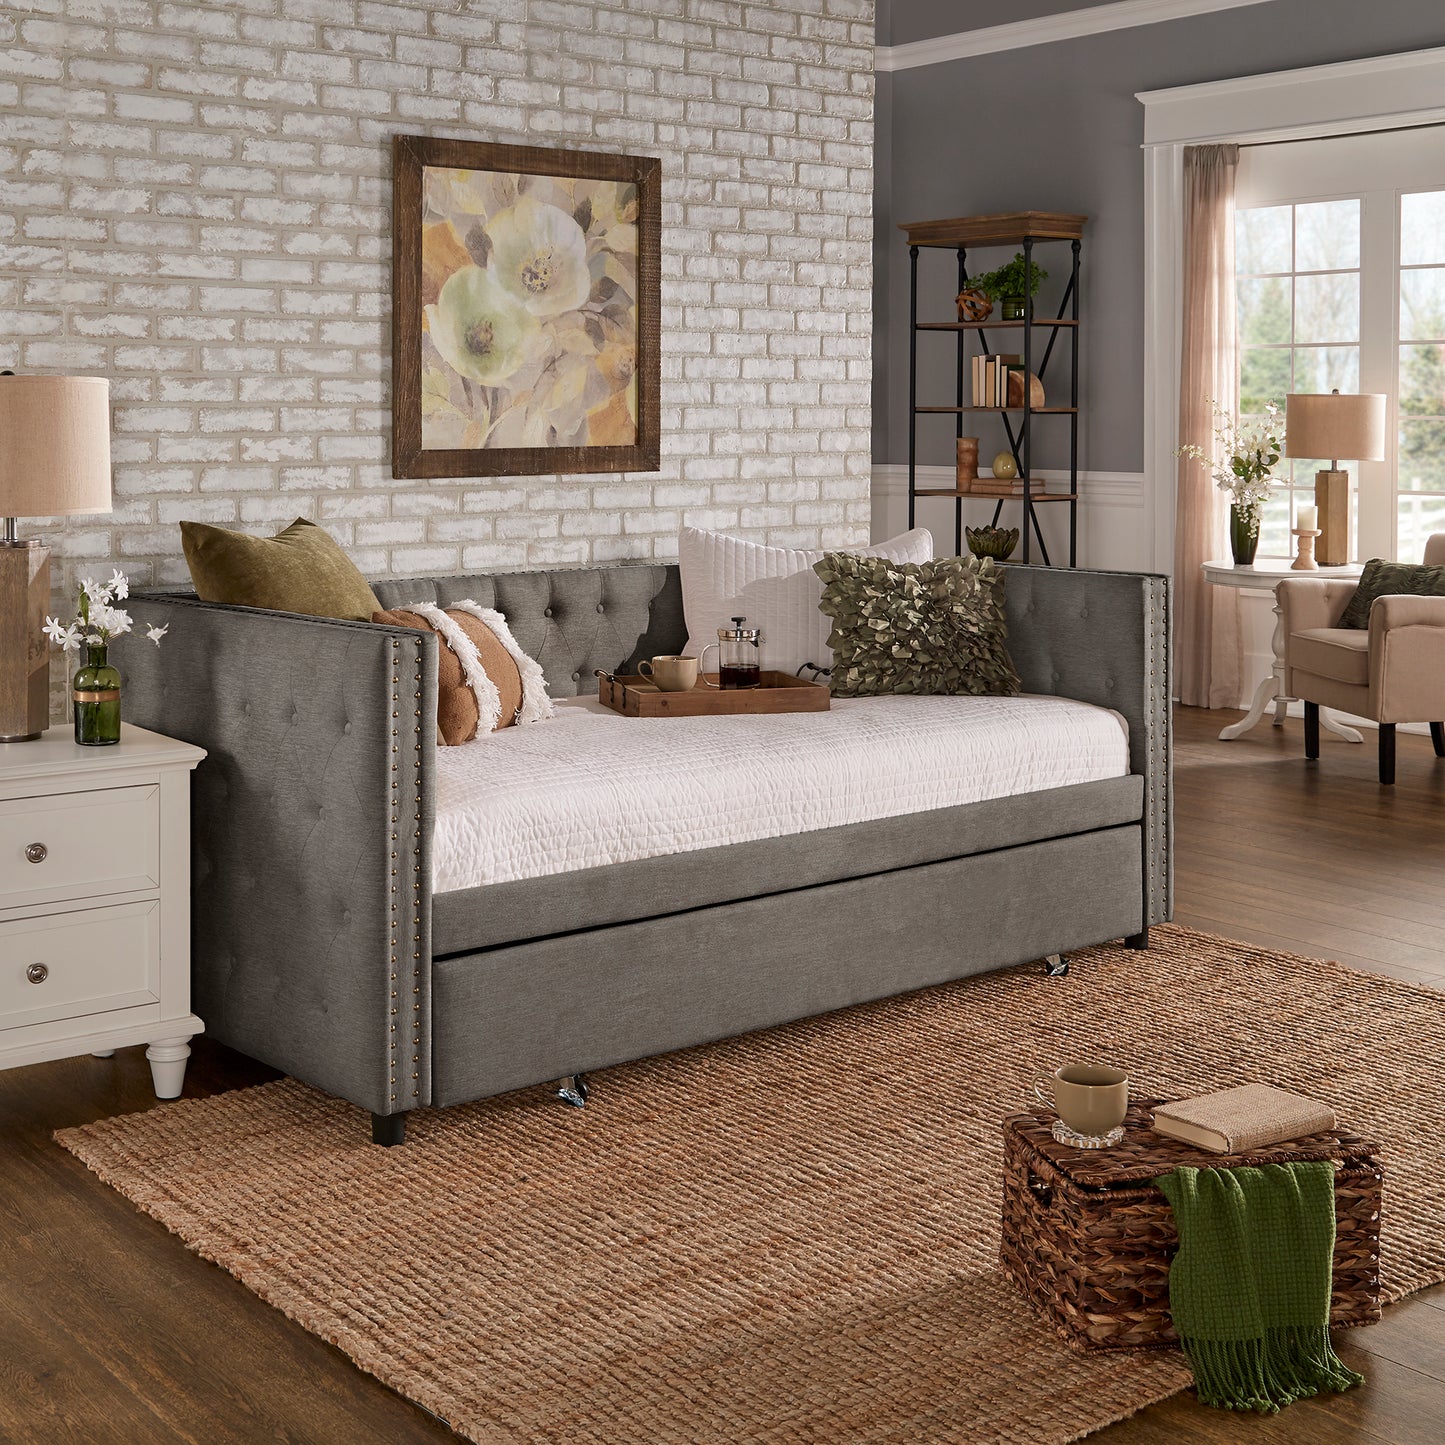 Weave Fabric Daybed - Grey